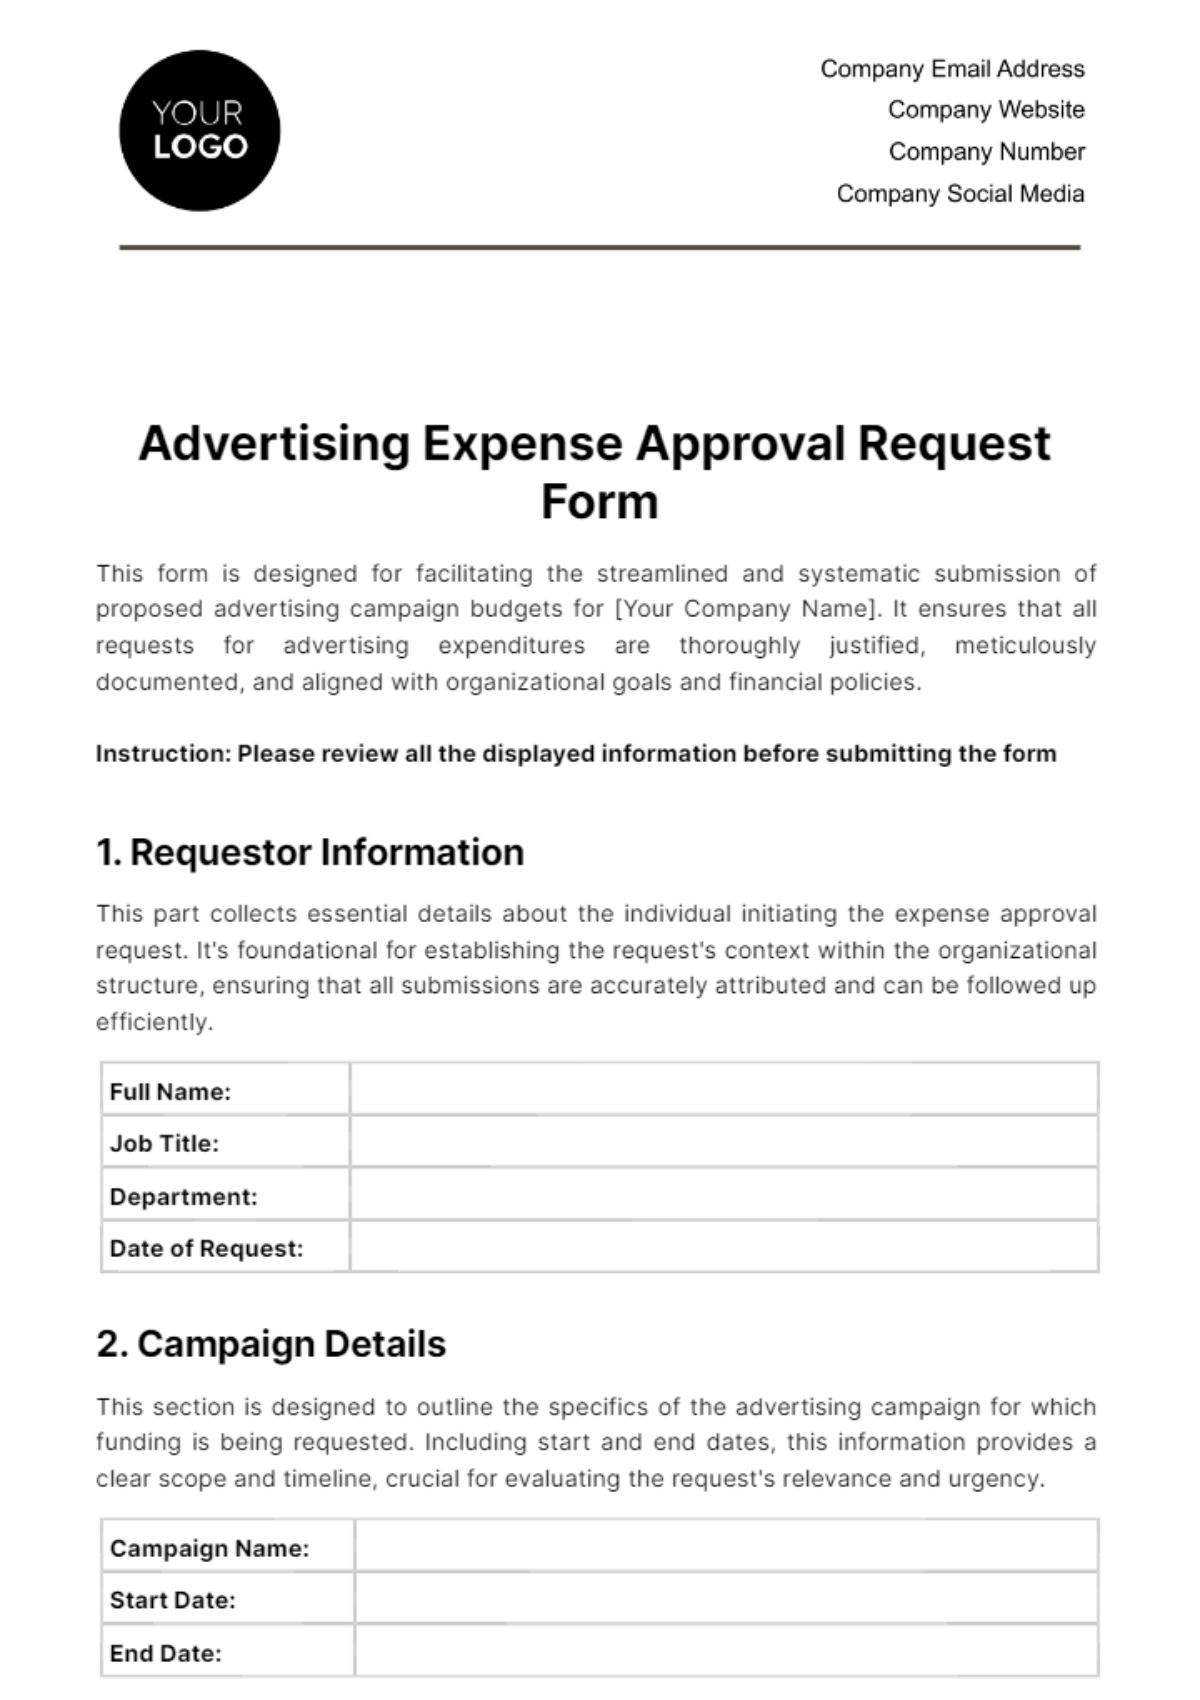 Free Advertising Expense Approval Request Form Template